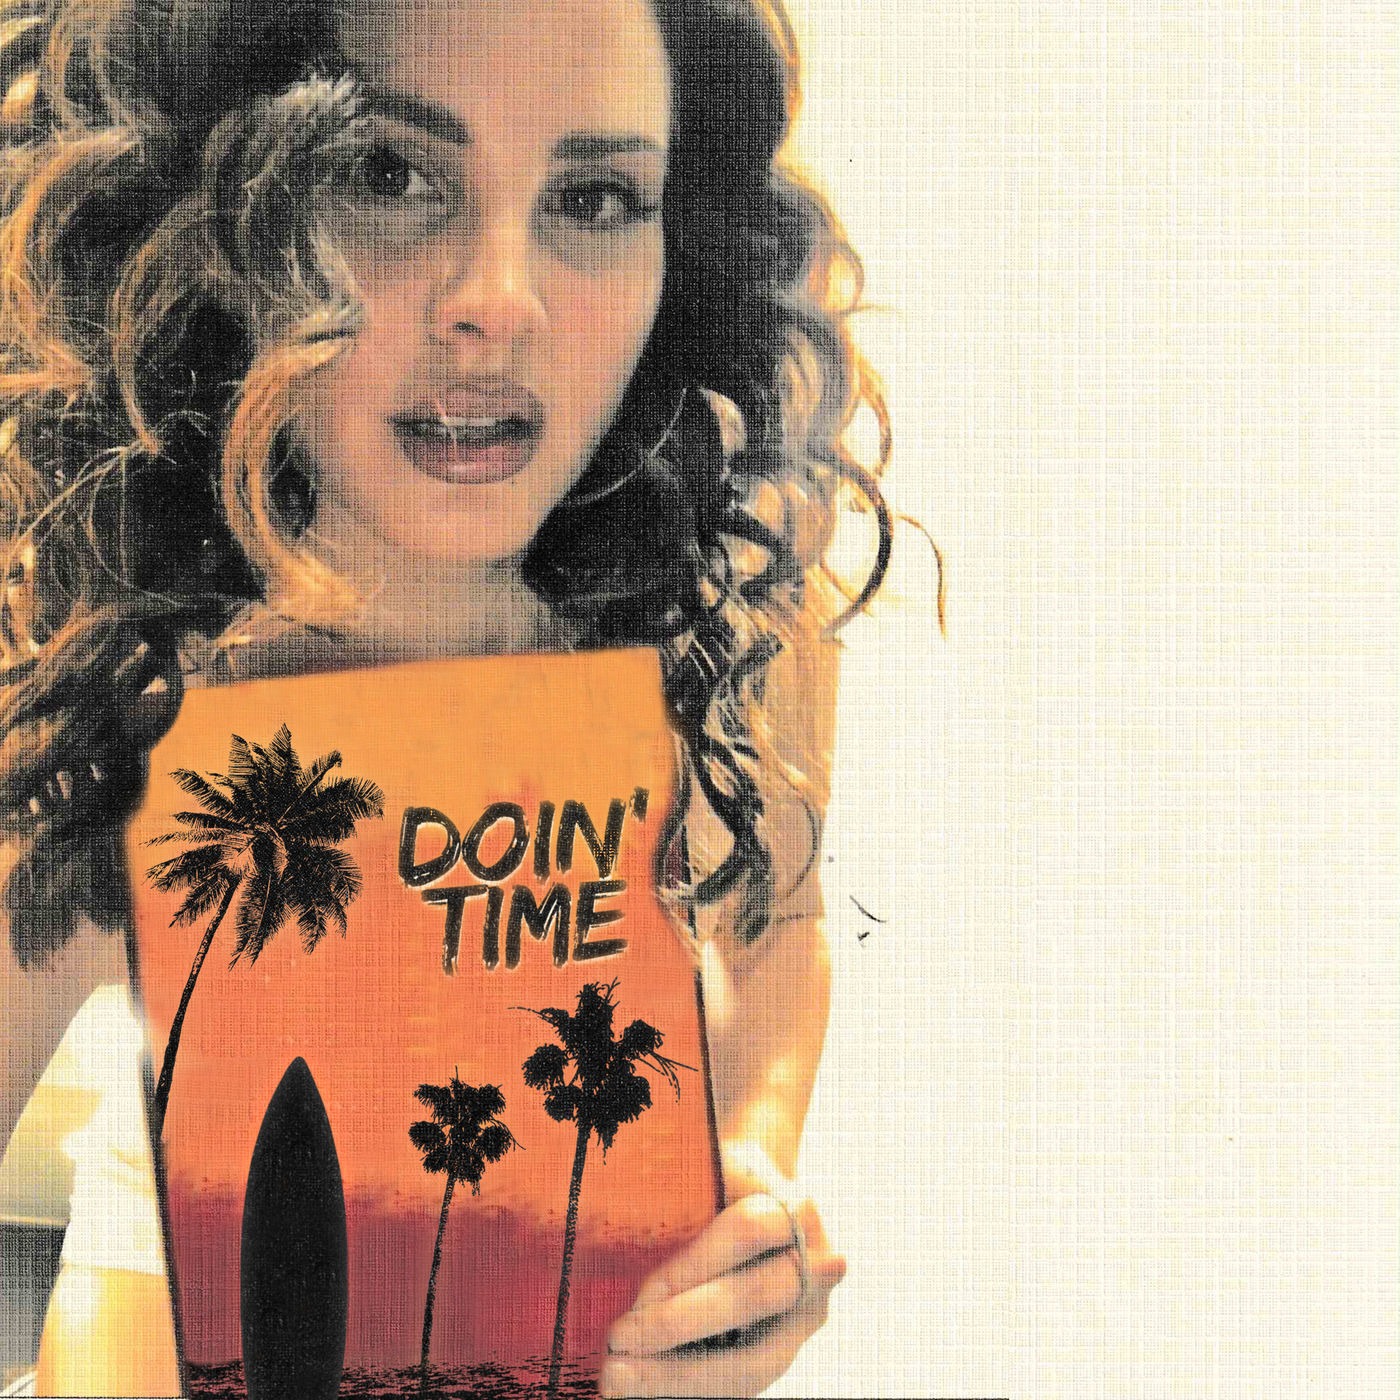 Lana Del Rey - Doin' Time review by BoboMusicalHobo - Album of The Year